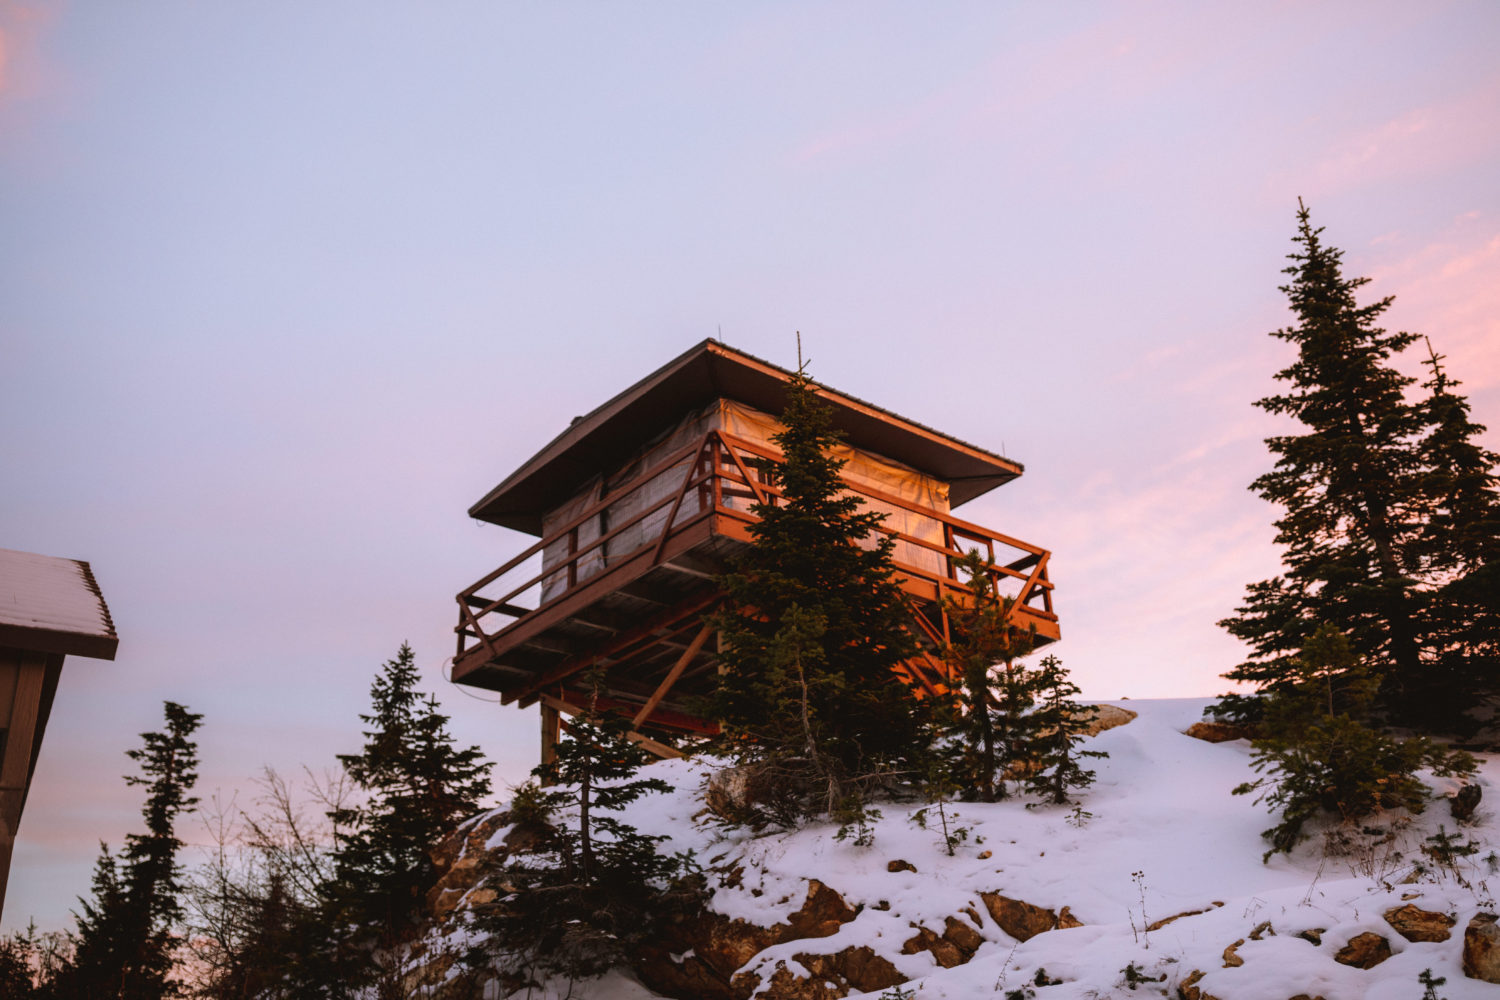 Hike To The Quartz Mountain Fire Lookout In Mount Spokane State Park